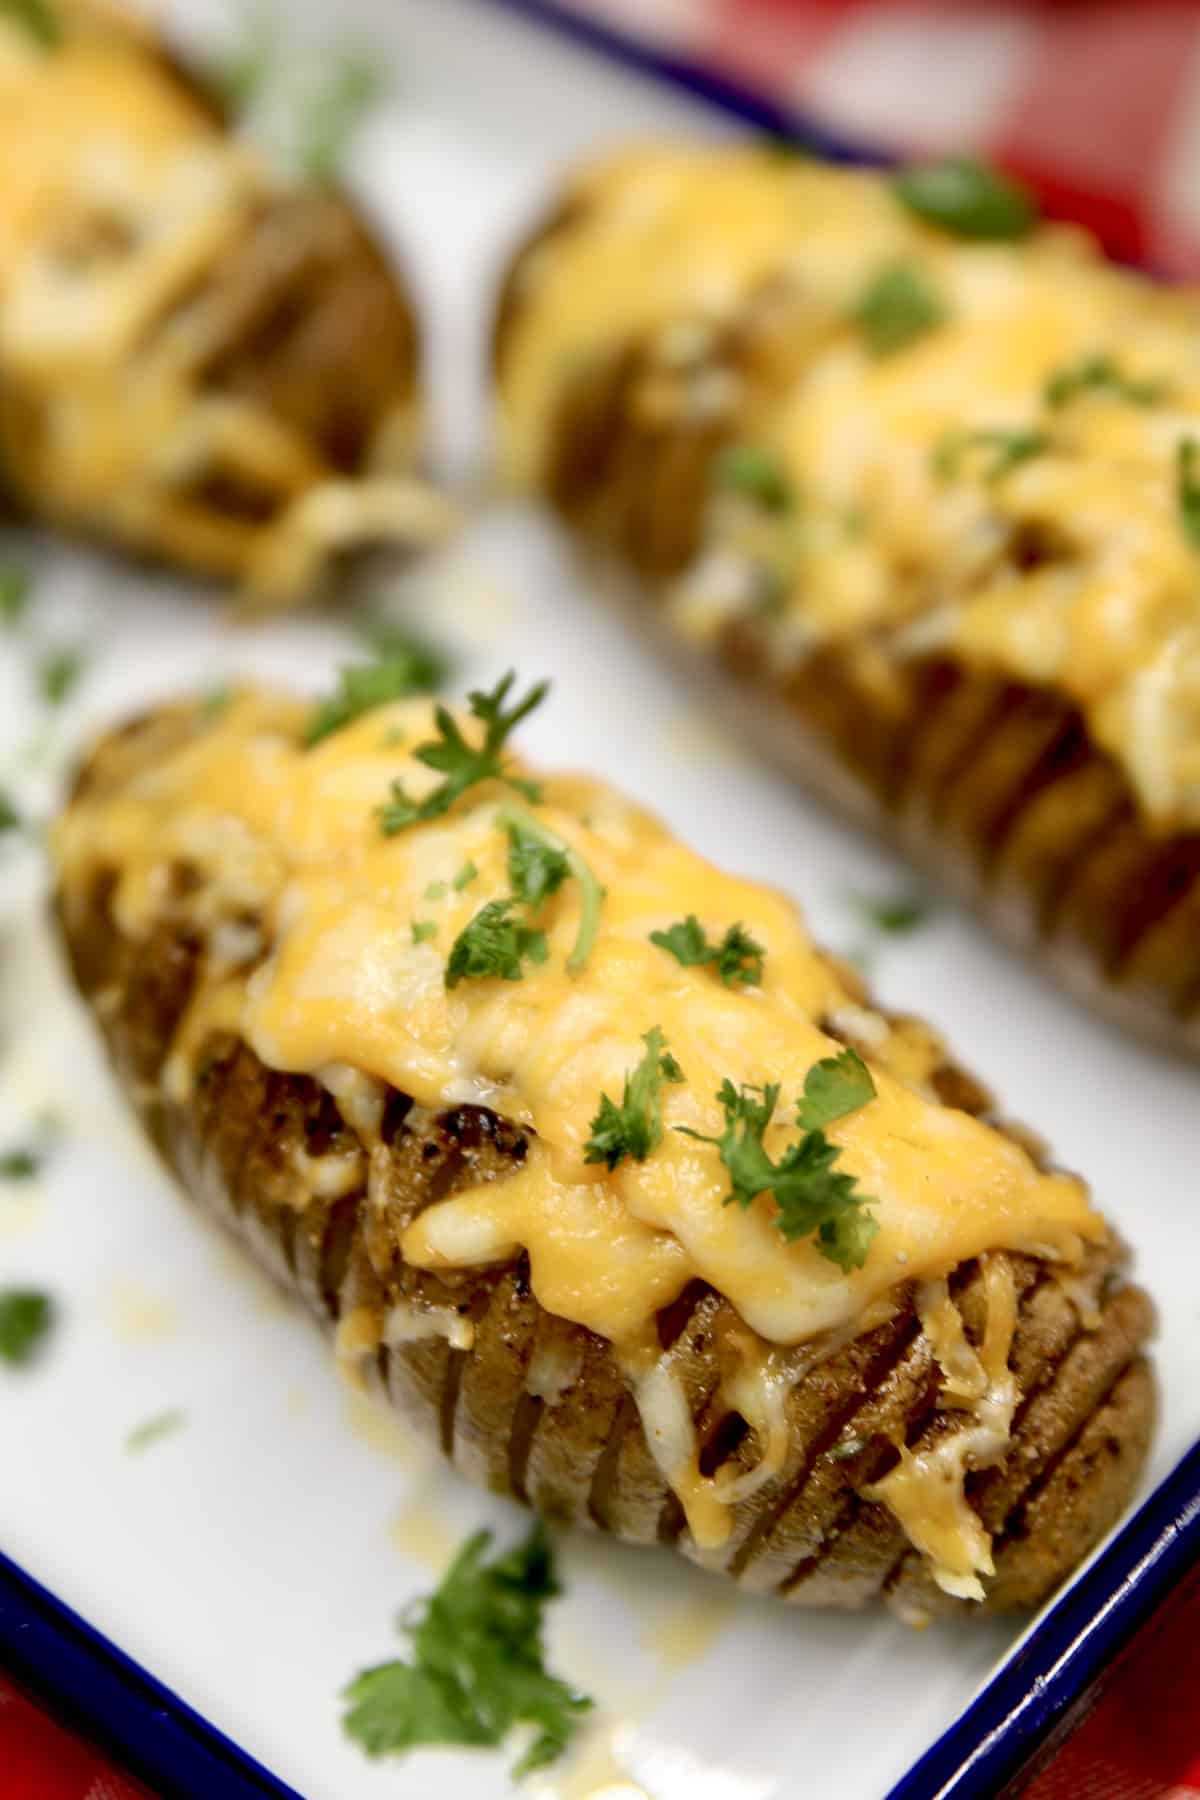 Cheese topped hasselback potatoes.